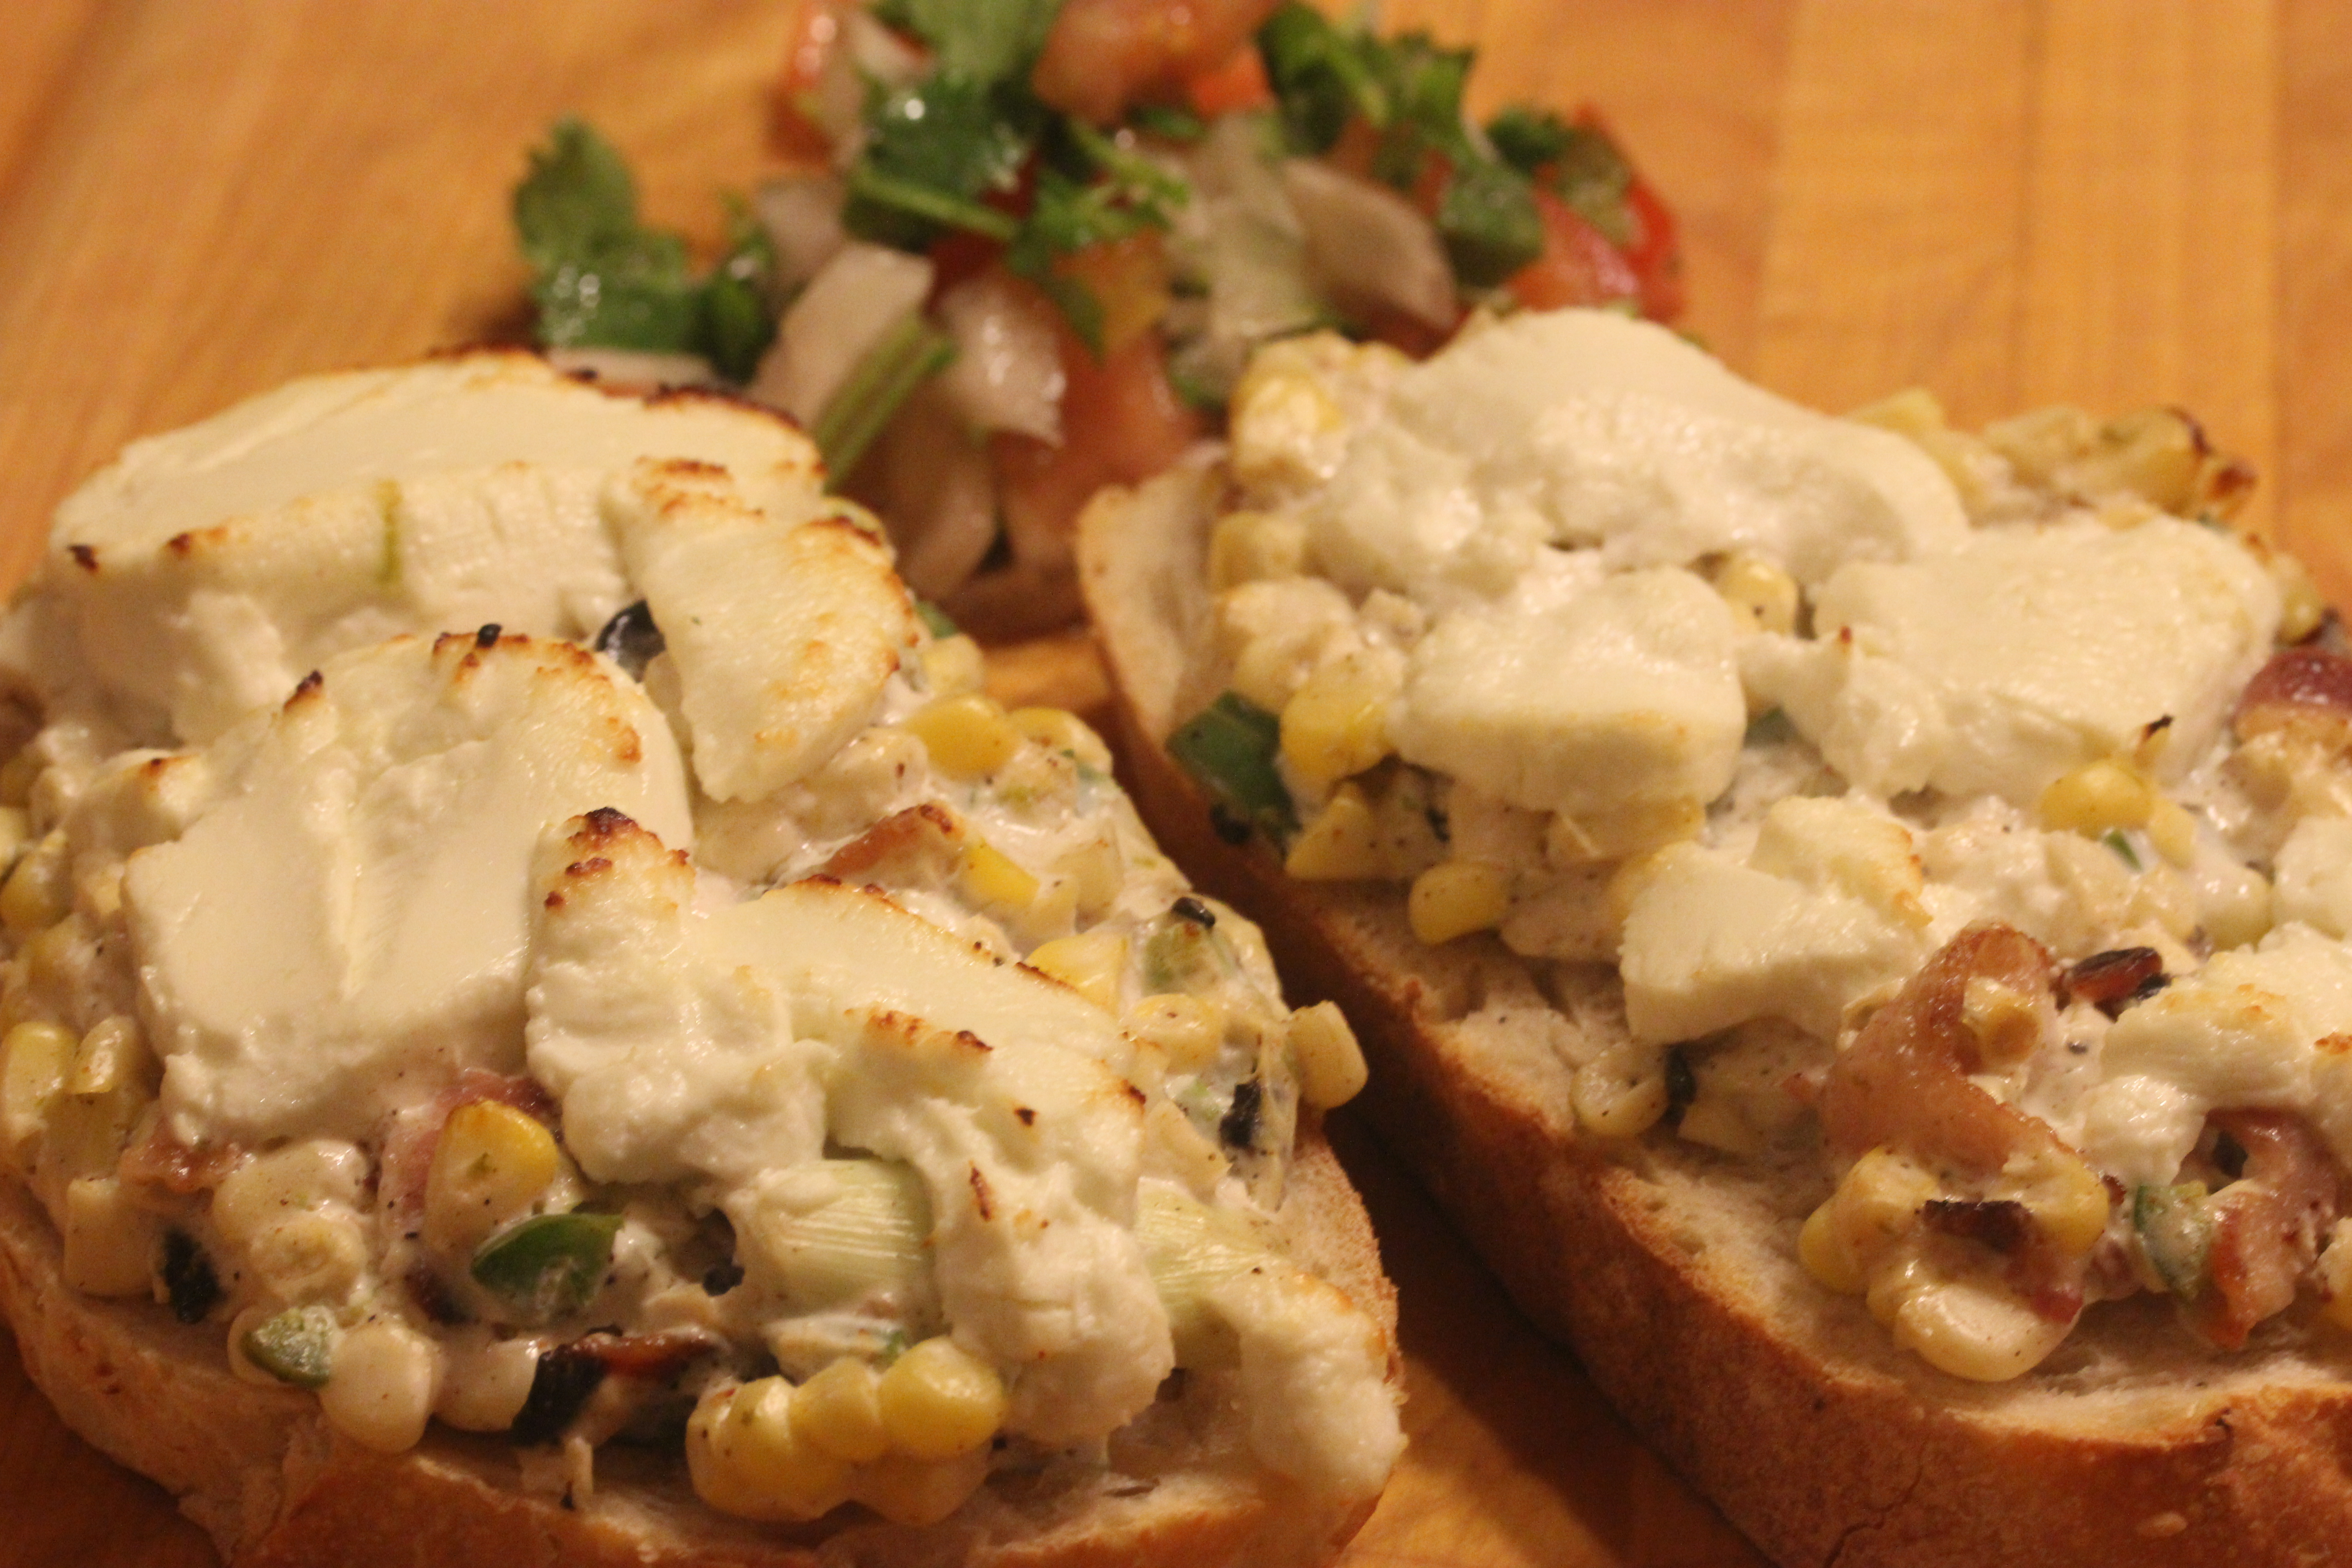 TBT Recipe: Corn, Jalapeño and Goat Cheese Tartine from Le Pain Quotidien